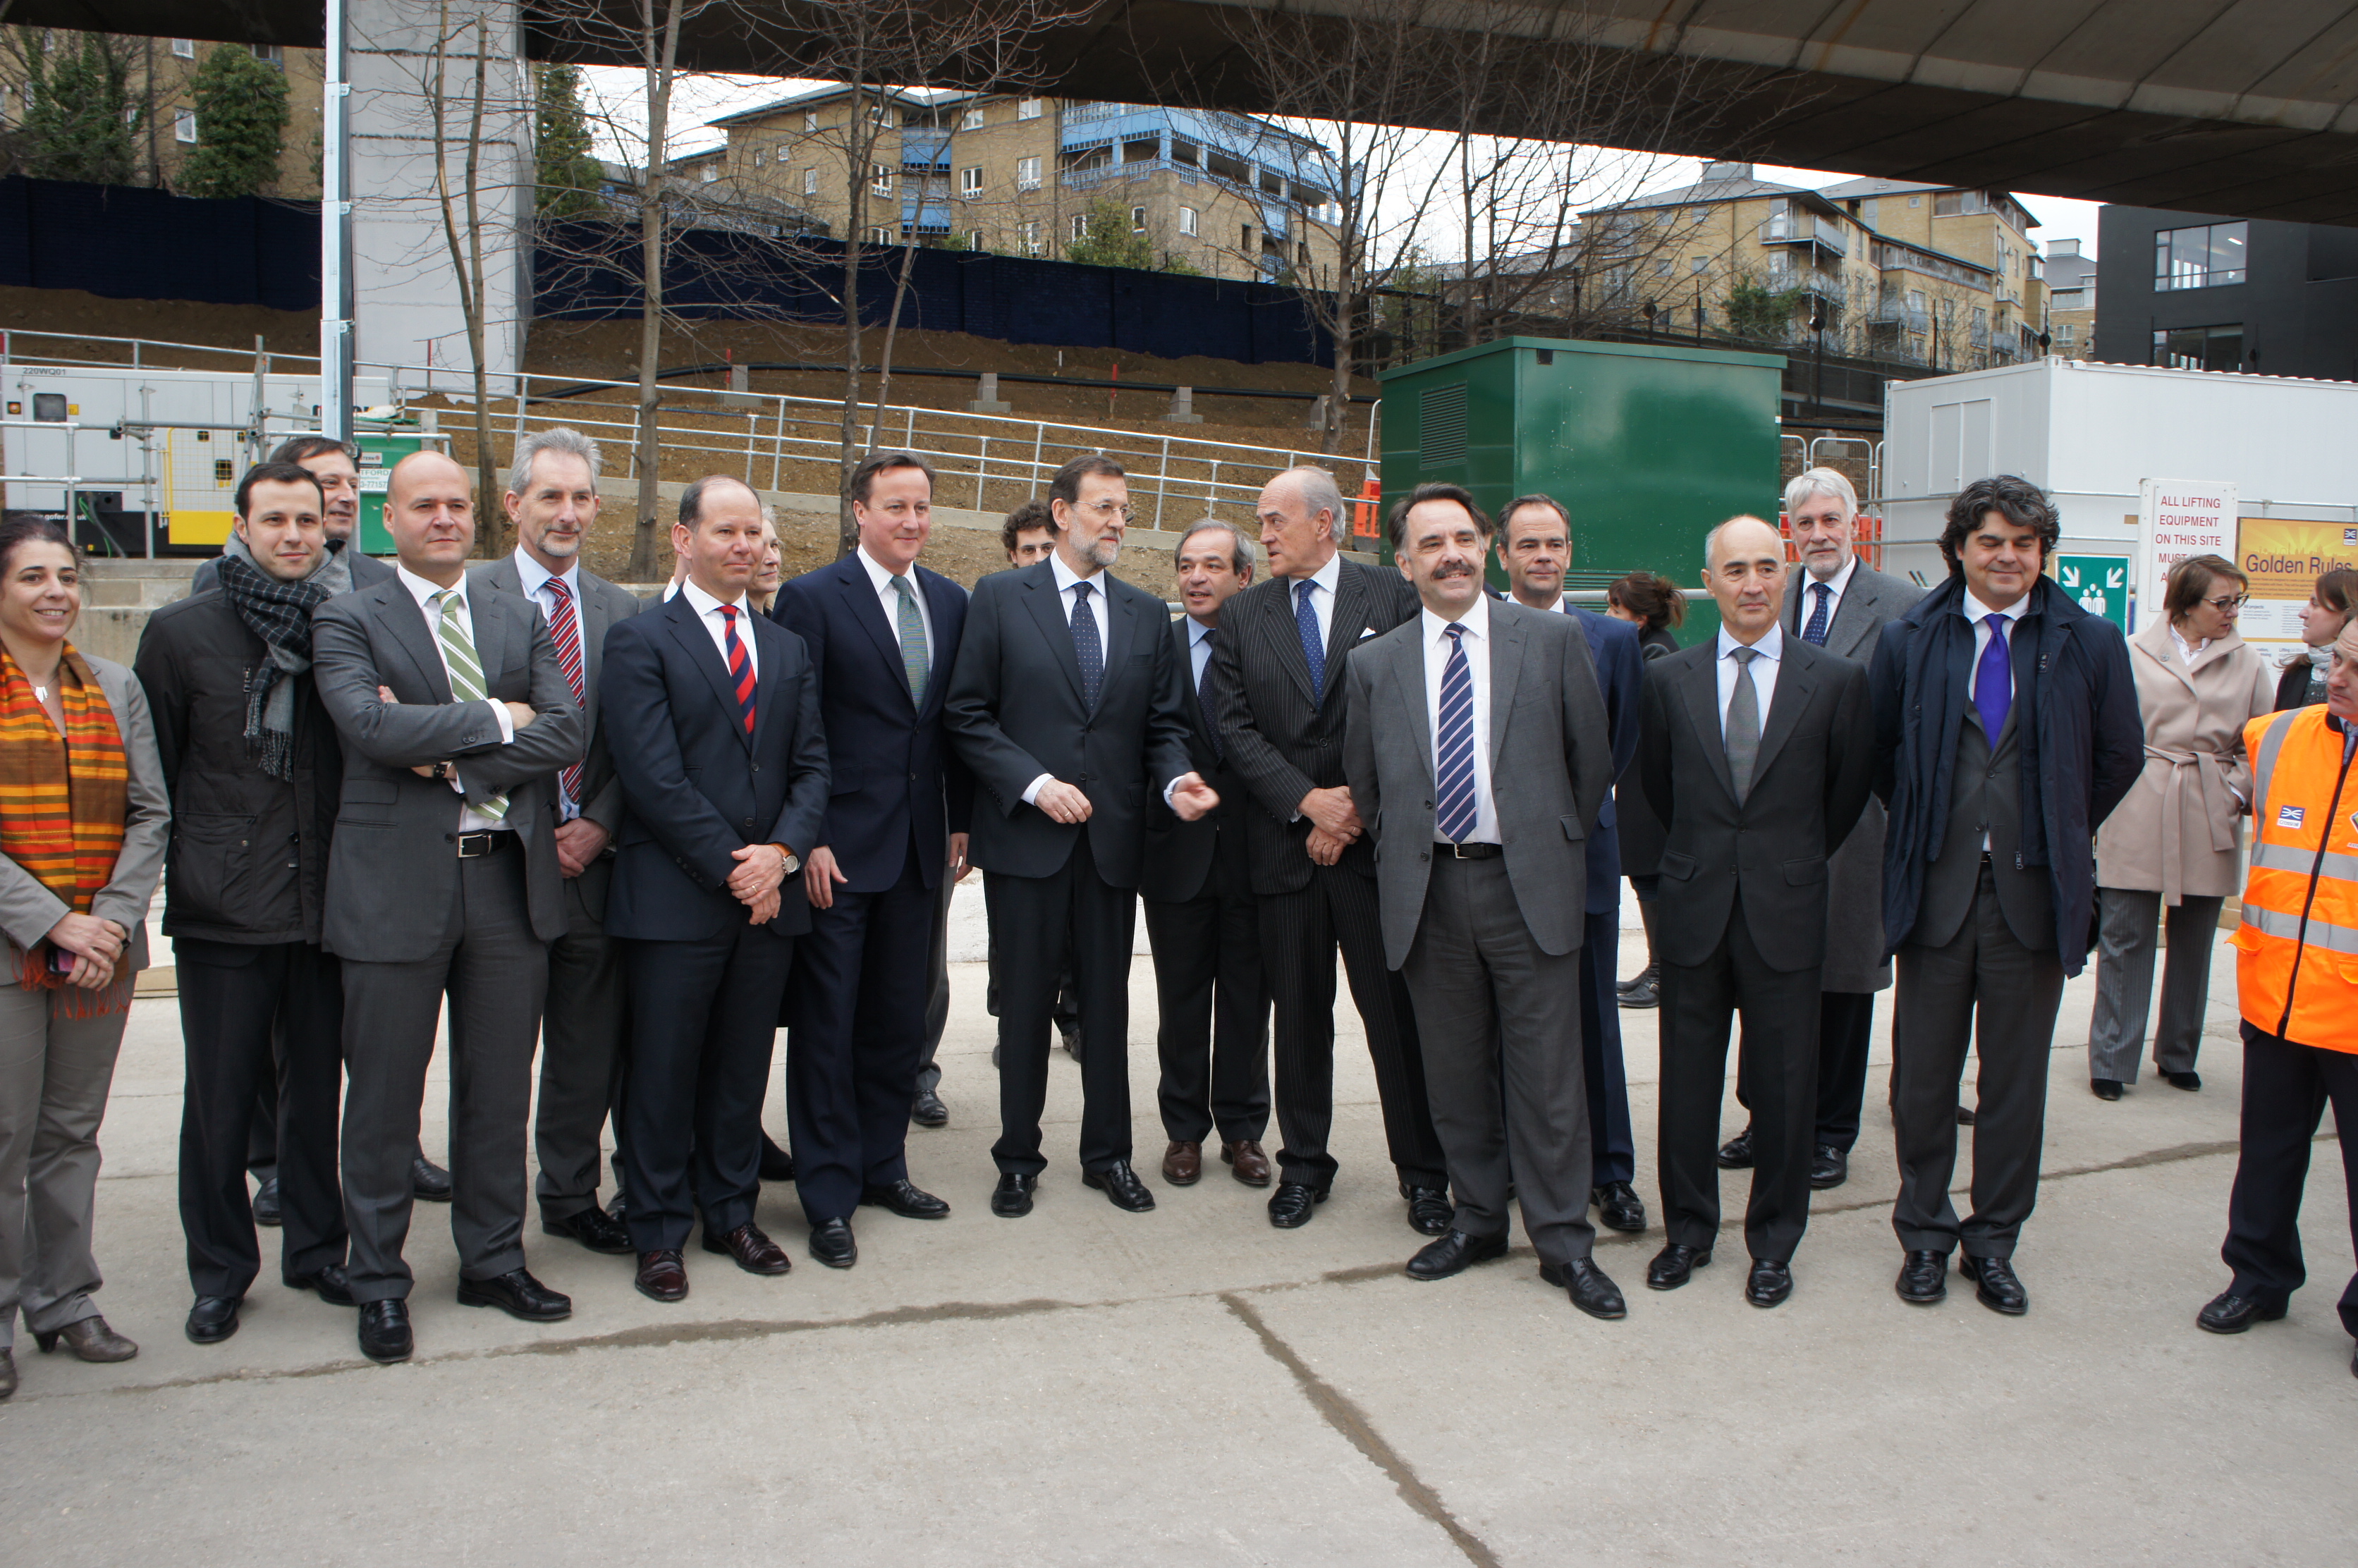 Spanish prime minister visits London's Crossrail project, on which FCC is working